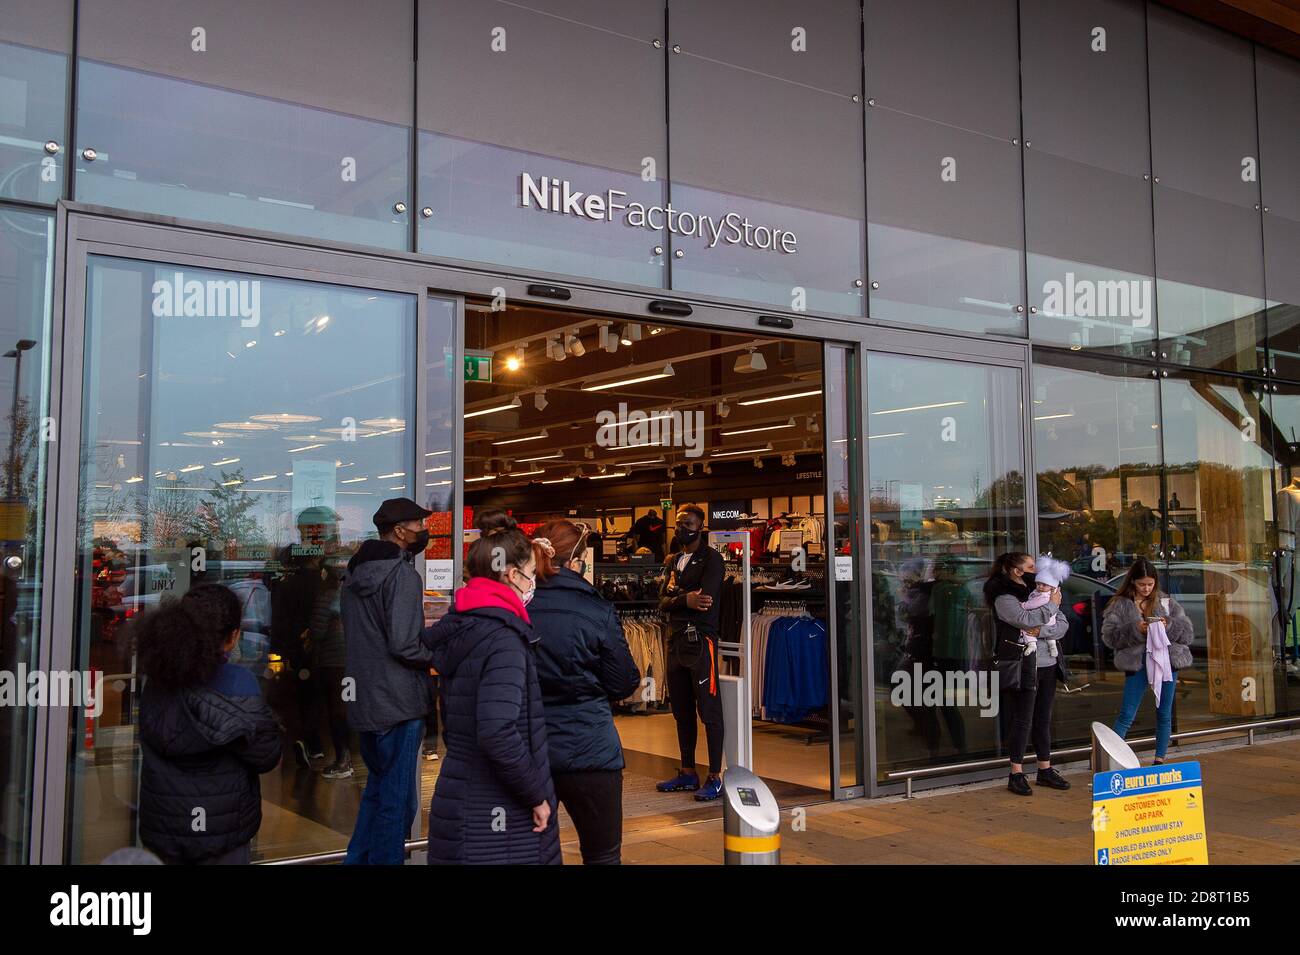 Taplow, Buckinghamshire, UK. 1st November, 2020. Shoppers queue to enter the Nike Factory Shop. The car park at the Bishop Centre Retail Park in Taplow, Buckinghamshire this morning was full. Shoppers were out in force doing pre lockdown shopping as well as buying Christmas presents. Boris Johnson announced last night that England is going into a second lockdown from later this week following the big increase in positive Covid-19 cases. Essential shops will, however, remain open. Credit: Maureen McLean/Alamy Live News Stock Photo